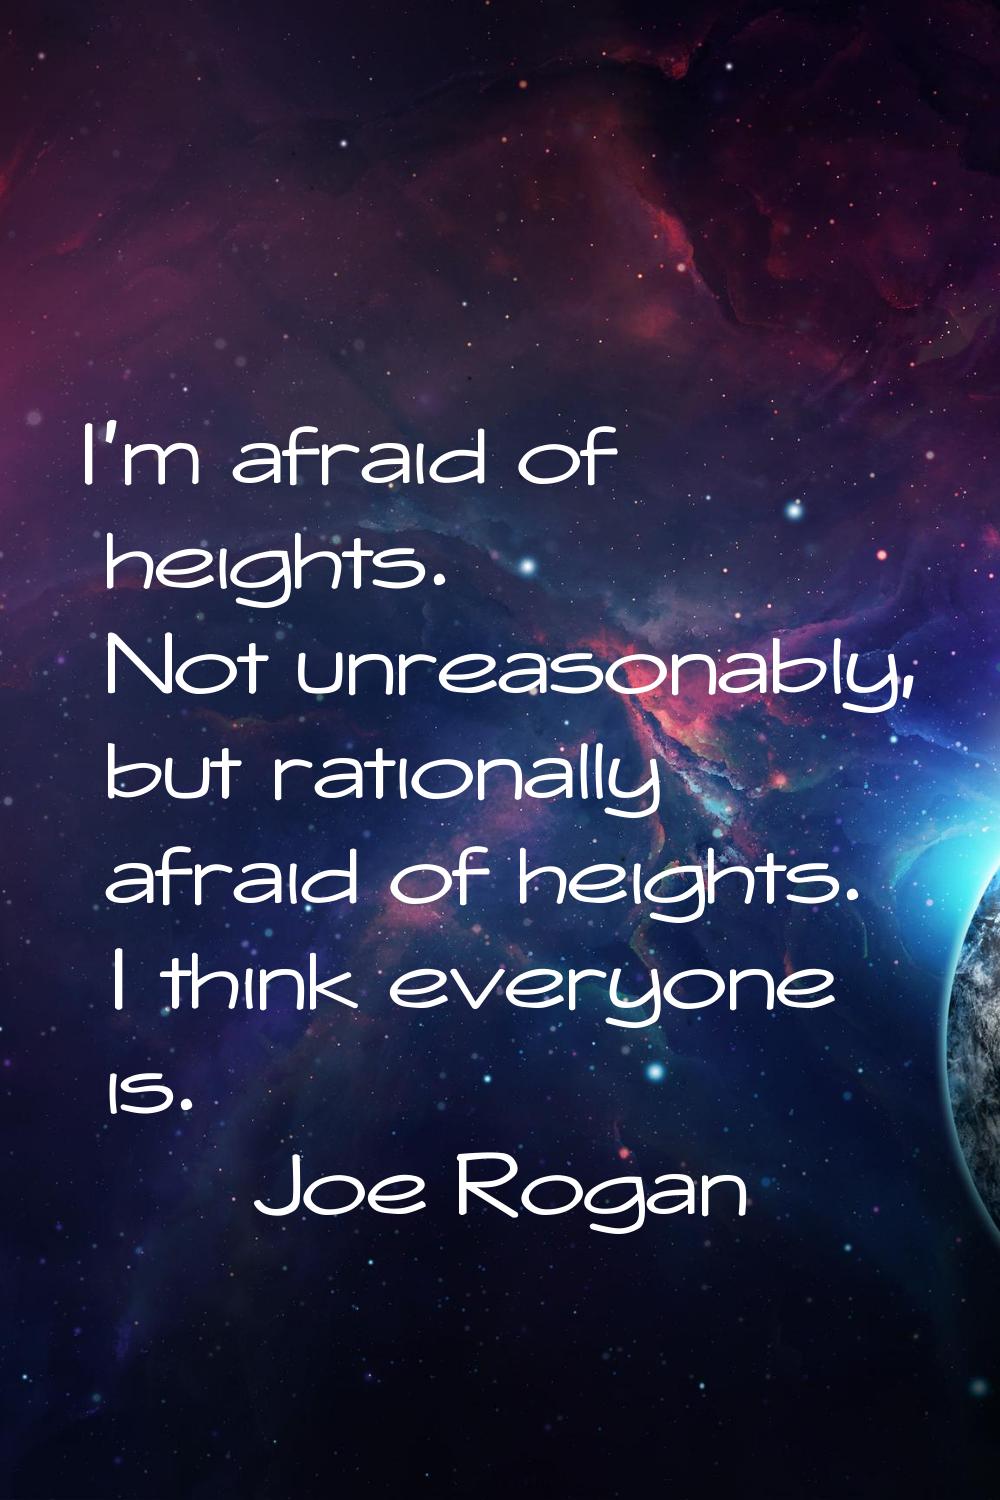 I'm afraid of heights. Not unreasonably, but rationally afraid of heights. I think everyone is.